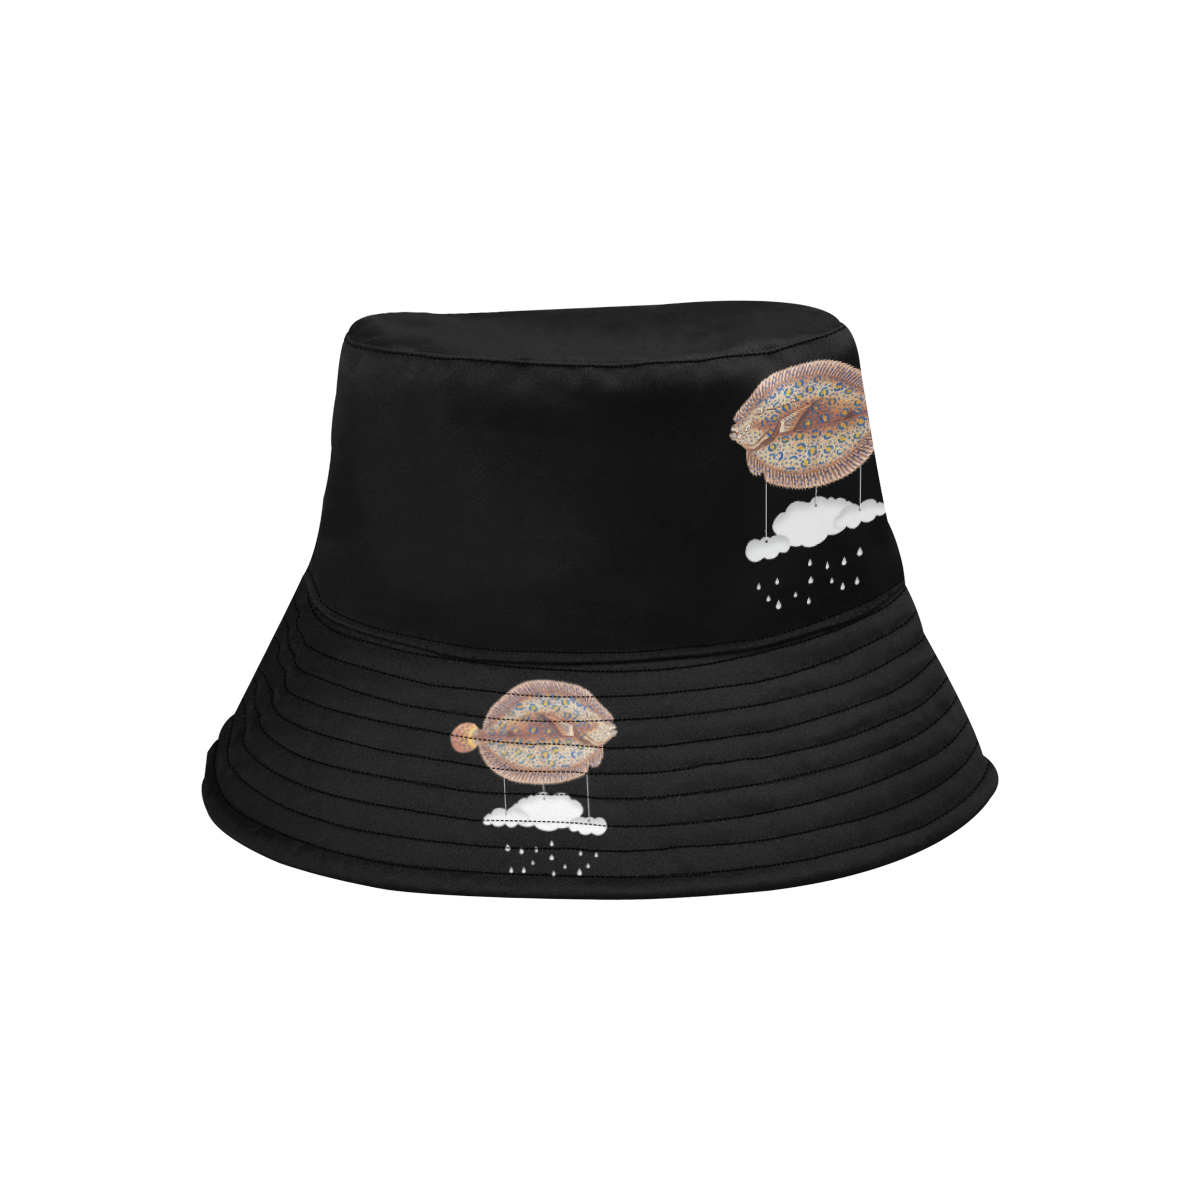 The Cloud Fish Surreal All Over Print Bucket Hat